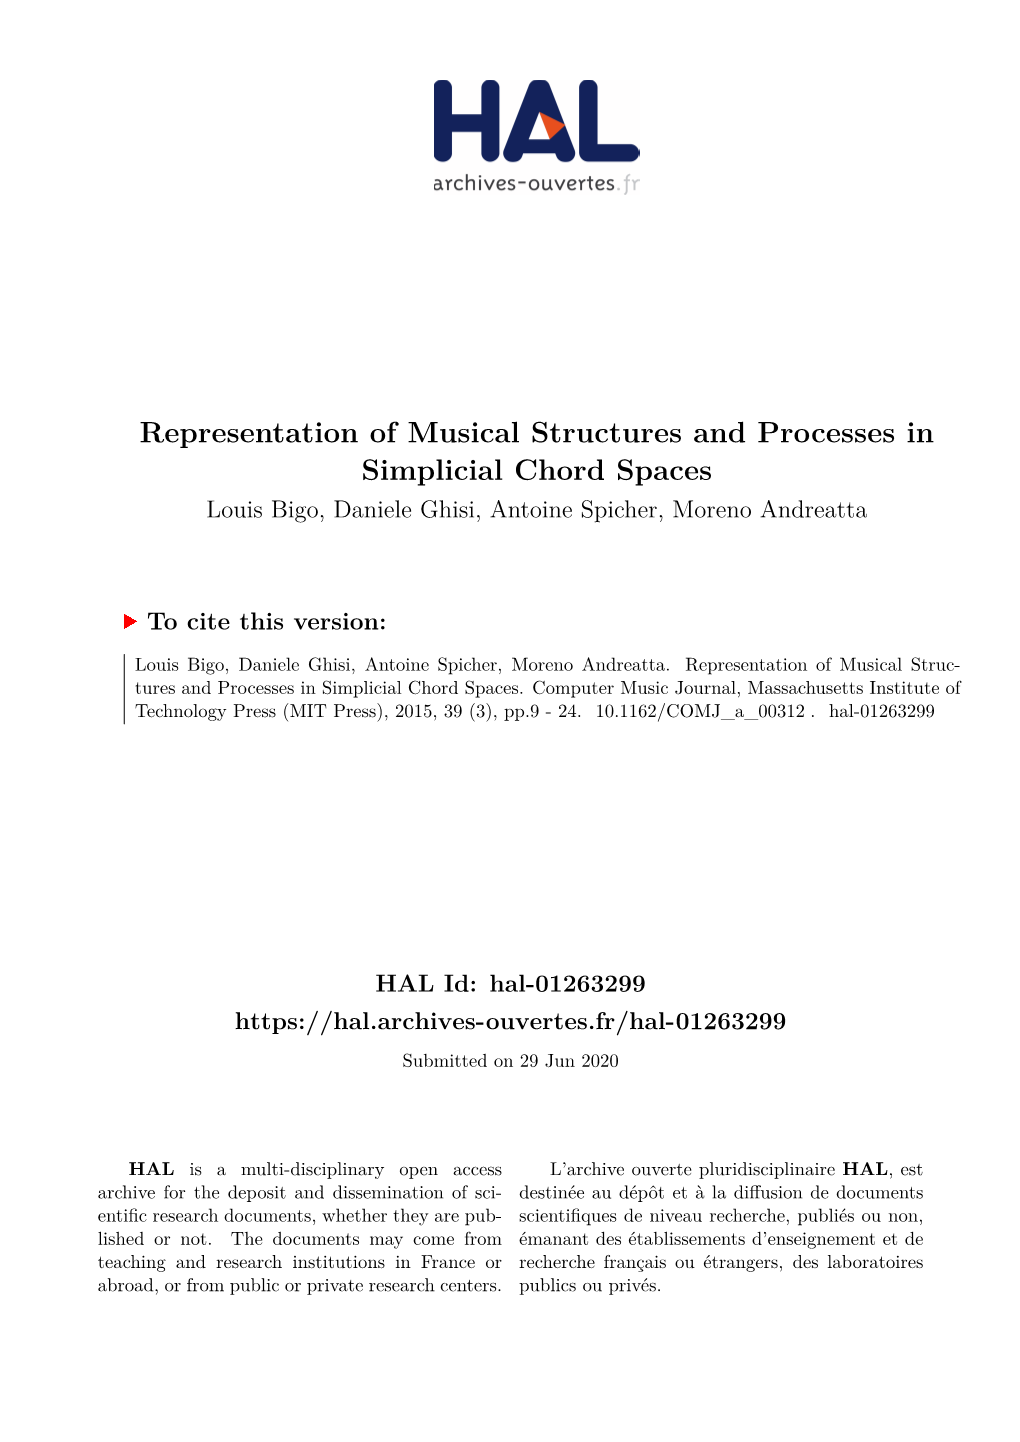 Representation of Musical Structures and Processes in Simplicial Chord Spaces Louis Bigo, Daniele Ghisi, Antoine Spicher, Moreno Andreatta